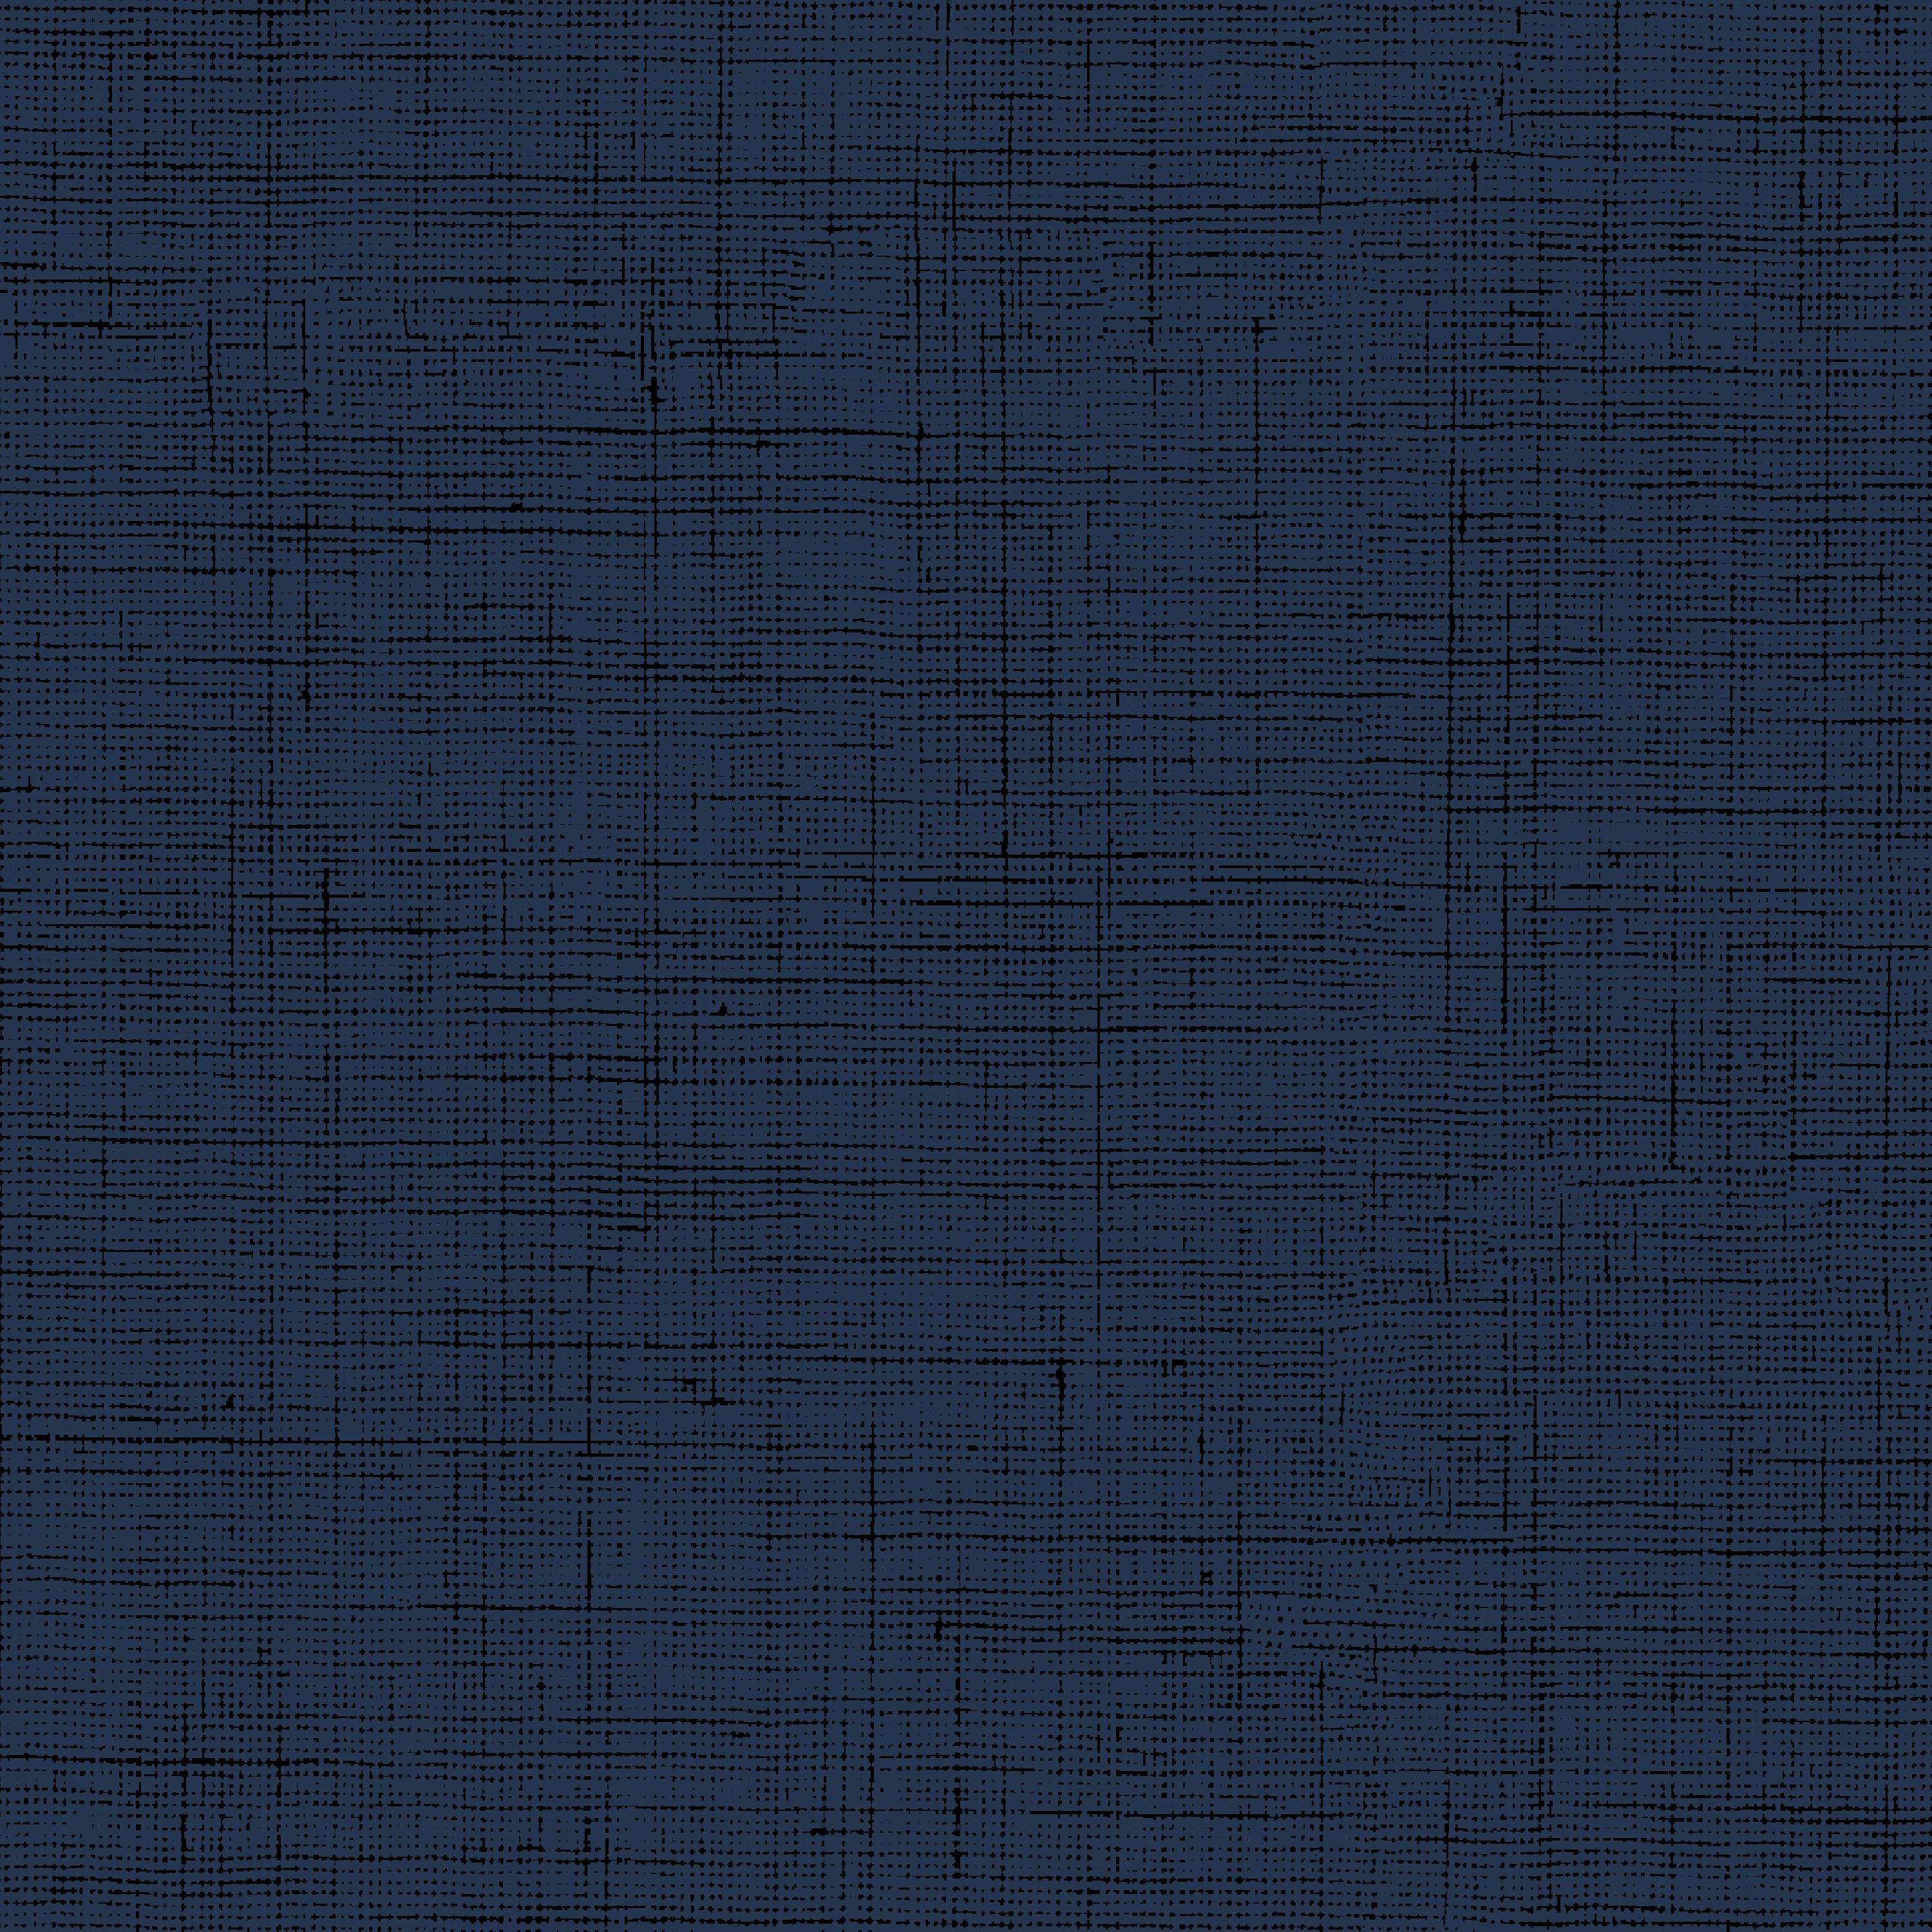 Waverly Inspirations 100% Cotton Duck 54" Textured Navy Color Sewing Fabric by the Yard